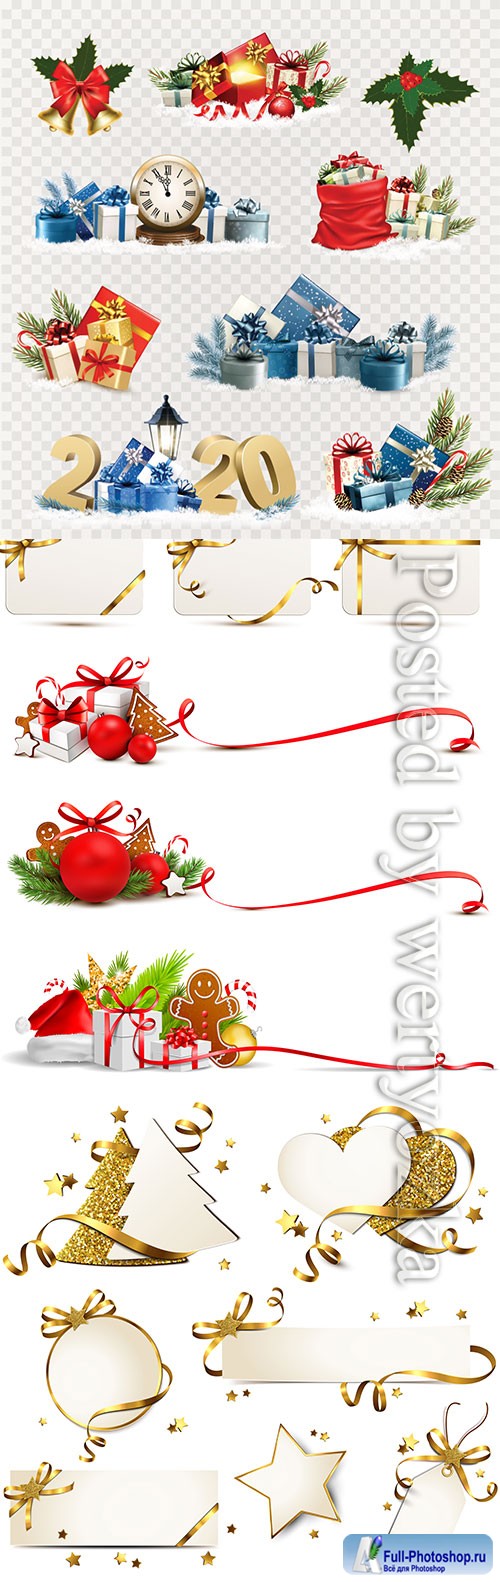 Christmas and New Year holiday elements vector illustration